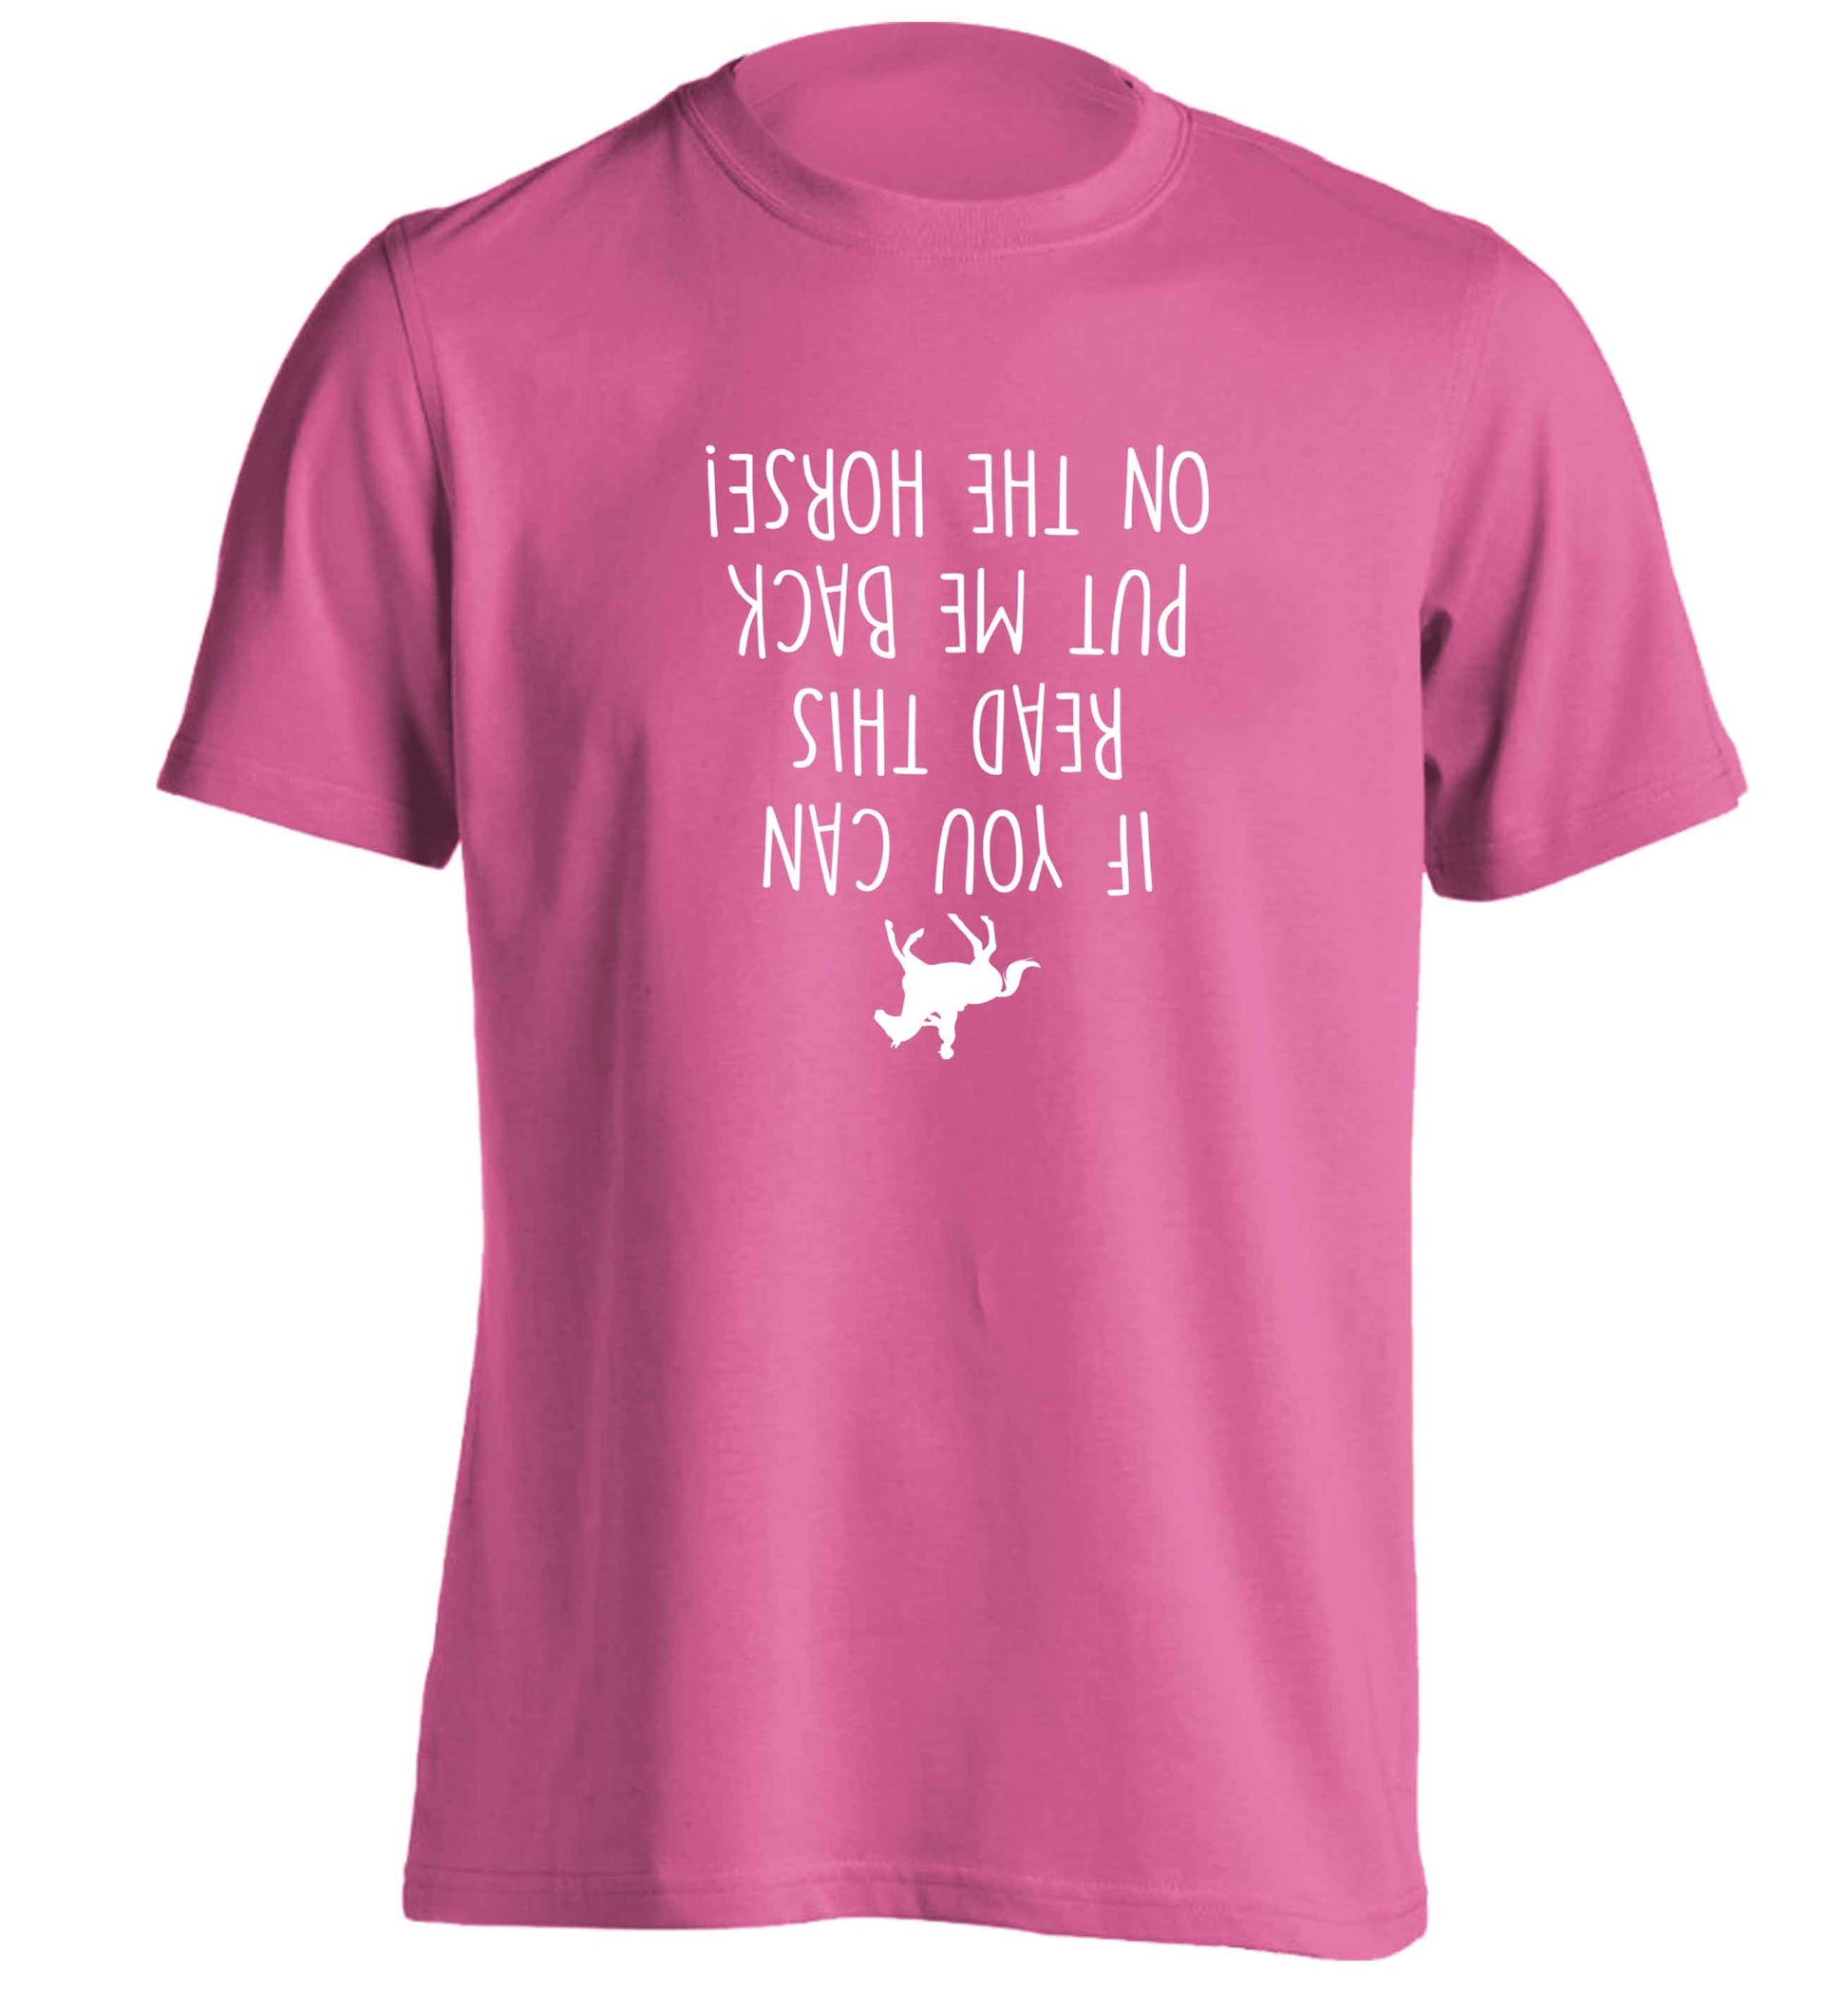 If you can read this put me back on the horse adults unisex pink Tshirt 2XL